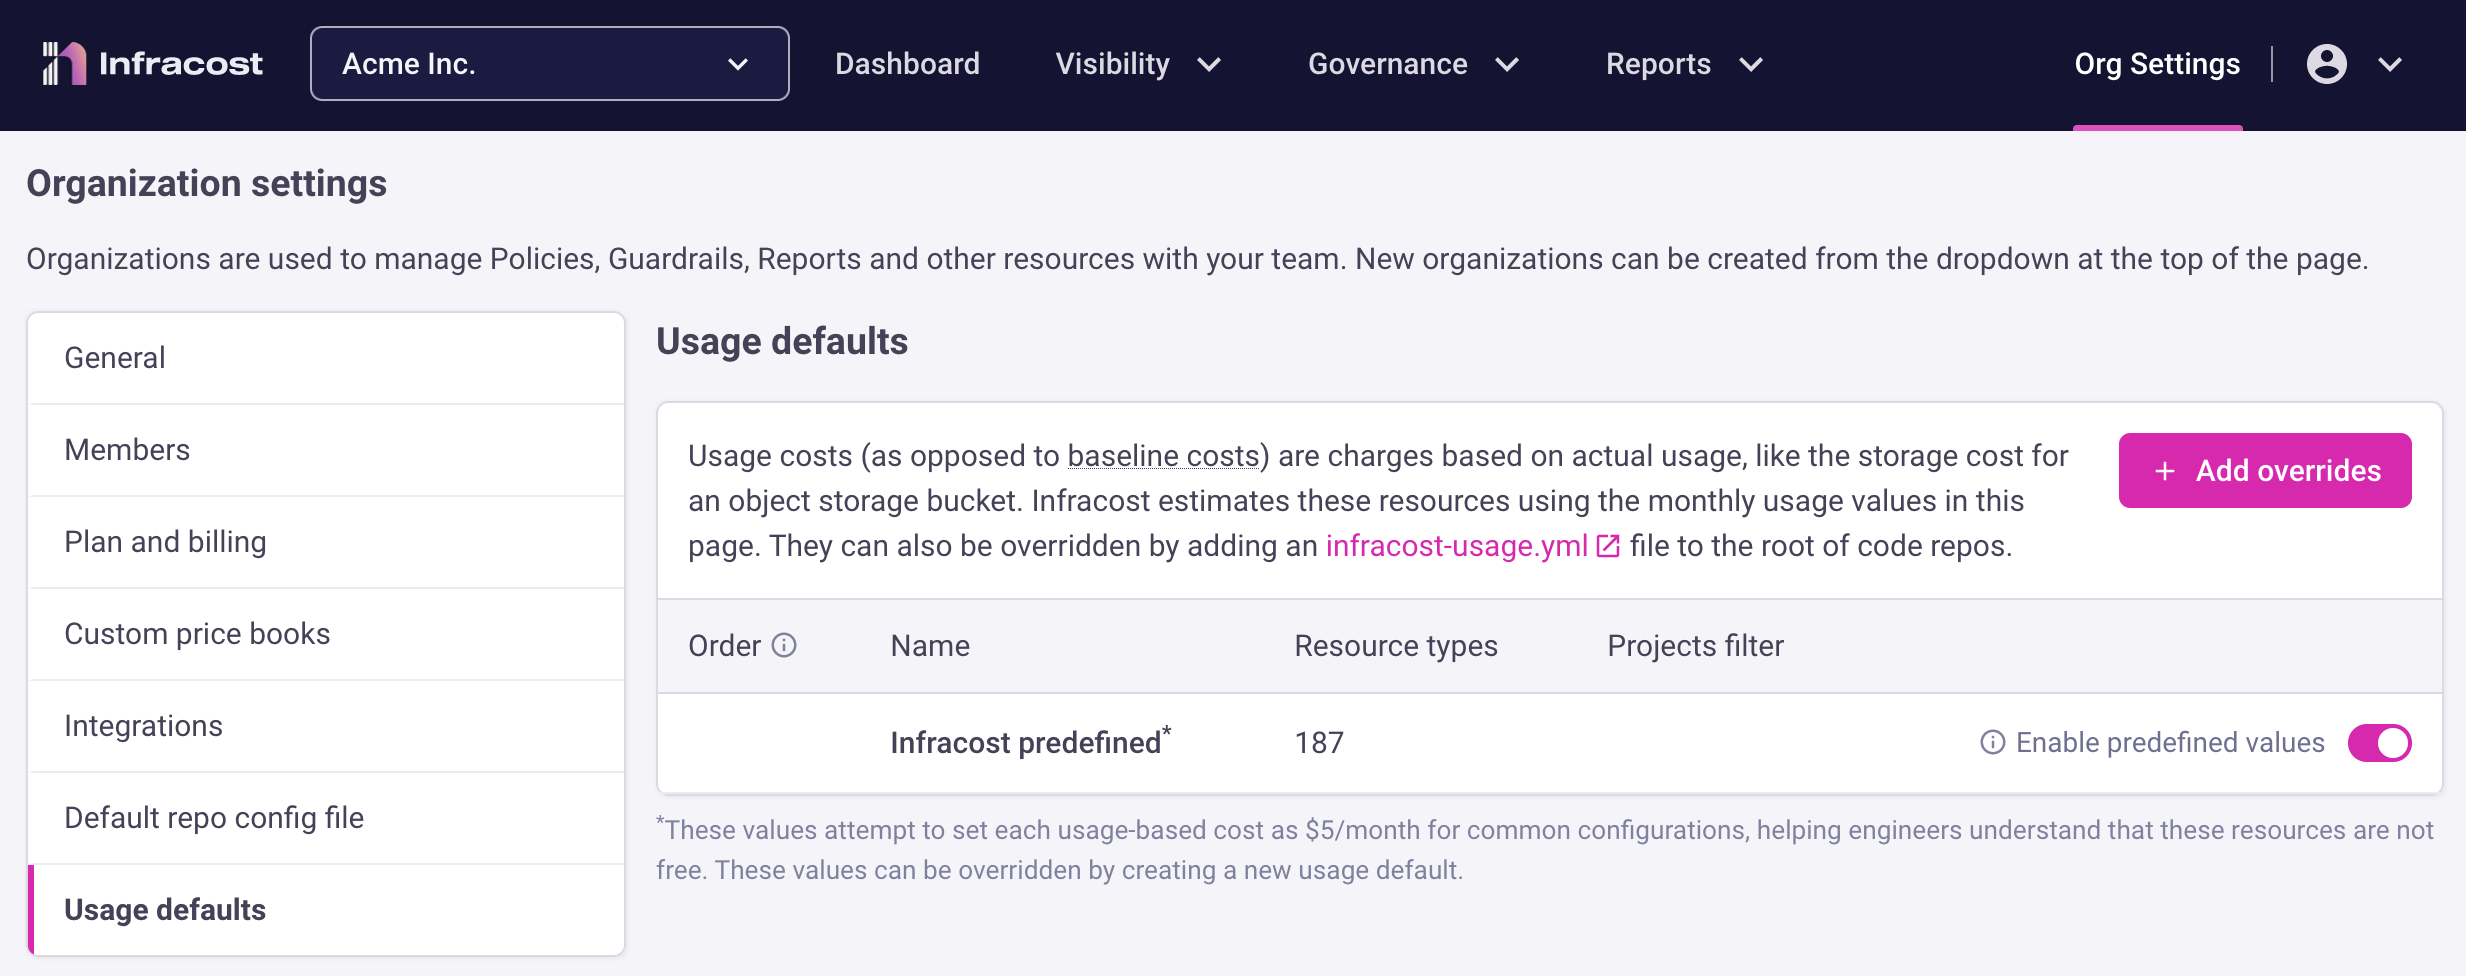 Usage defaults in Infracost Cloud